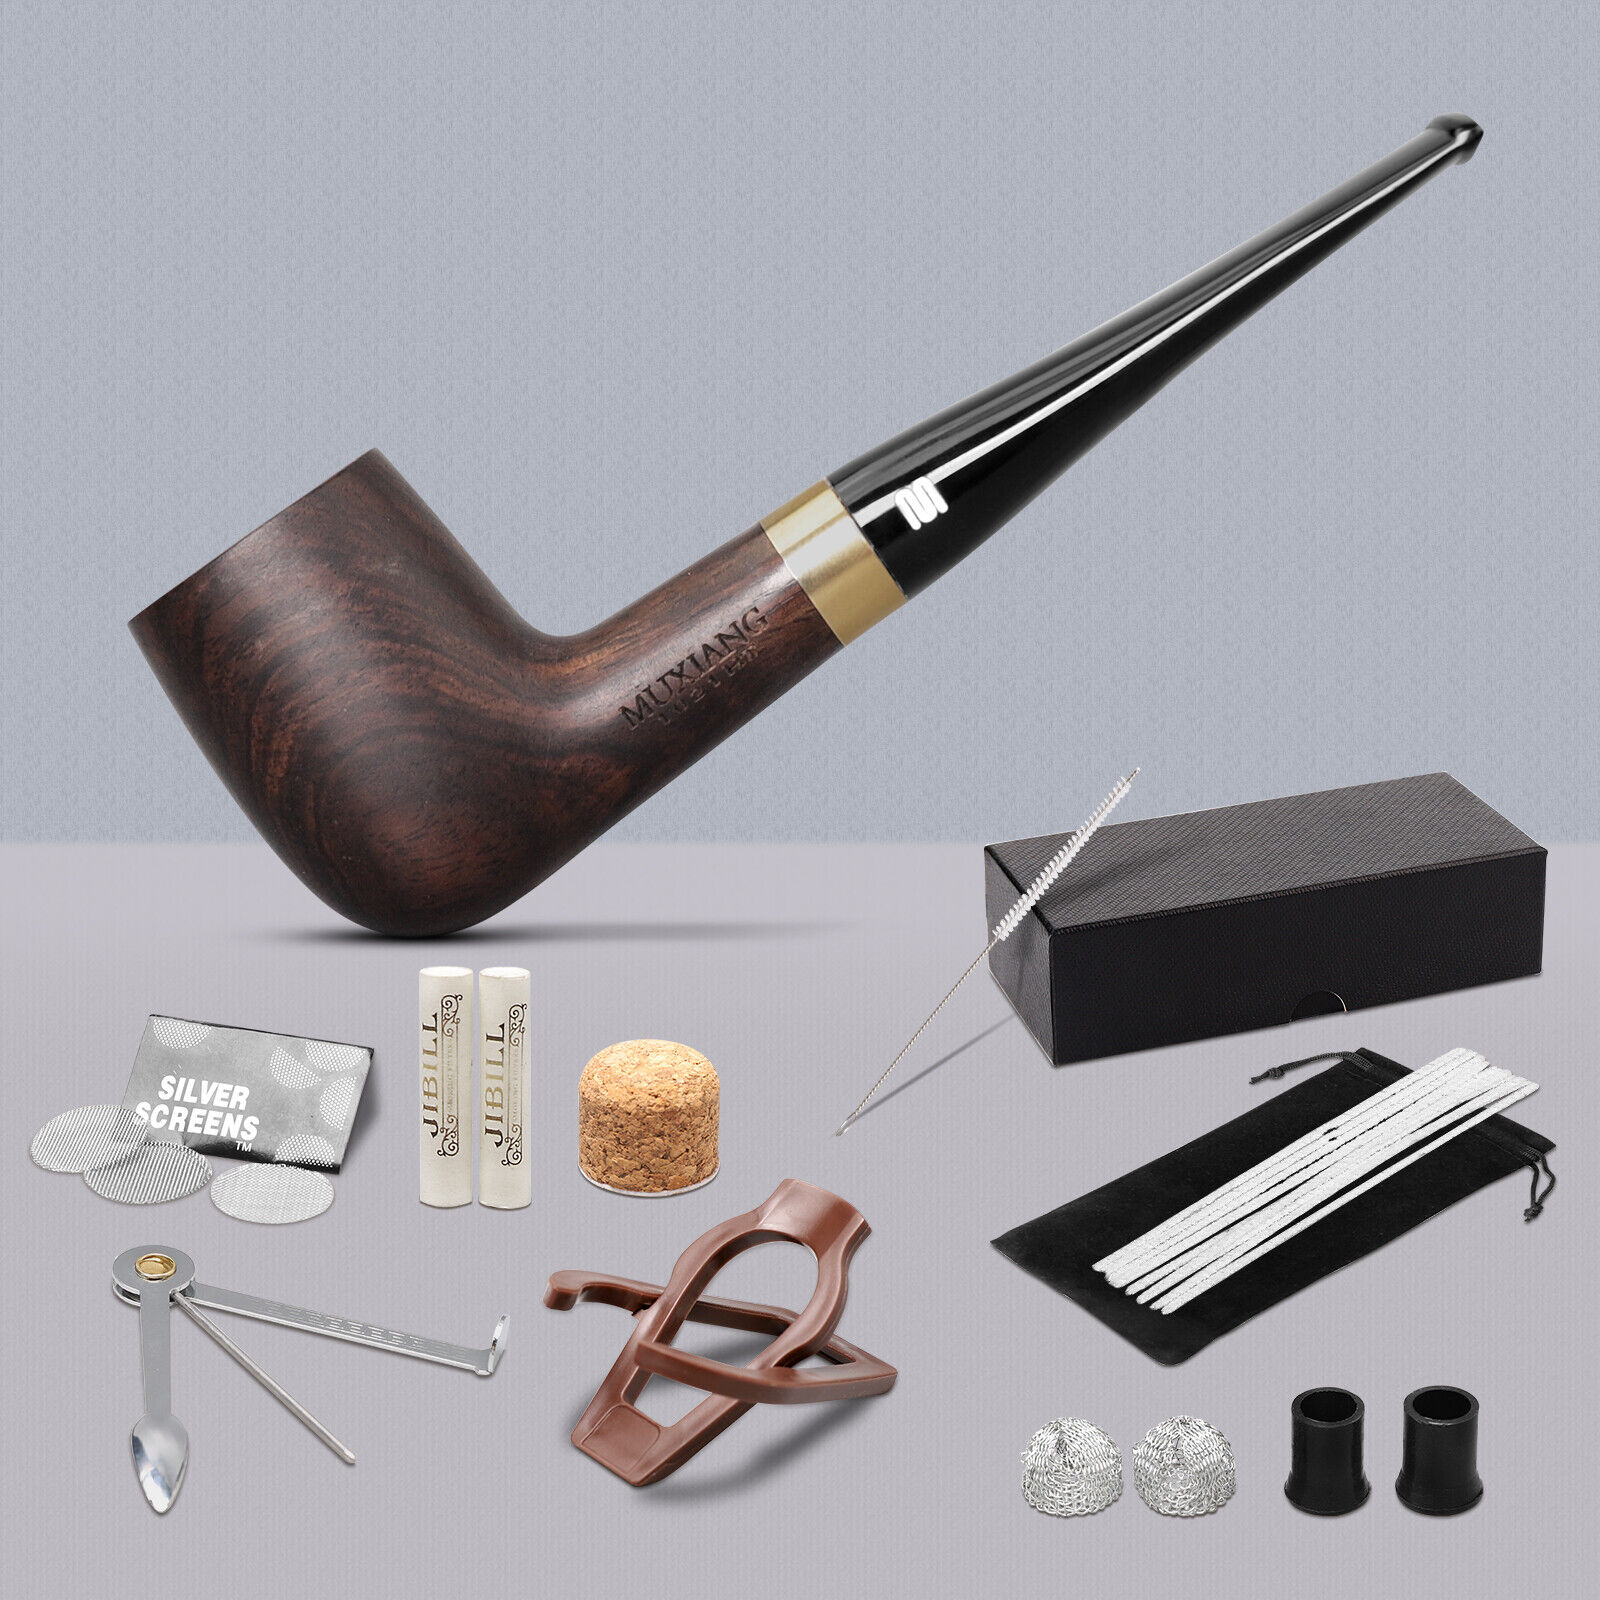 New MUXIANG Ebony Wooden Smoking Pipe 9mm Filter Straight Stem Tobacco Pipe 10 Tools.